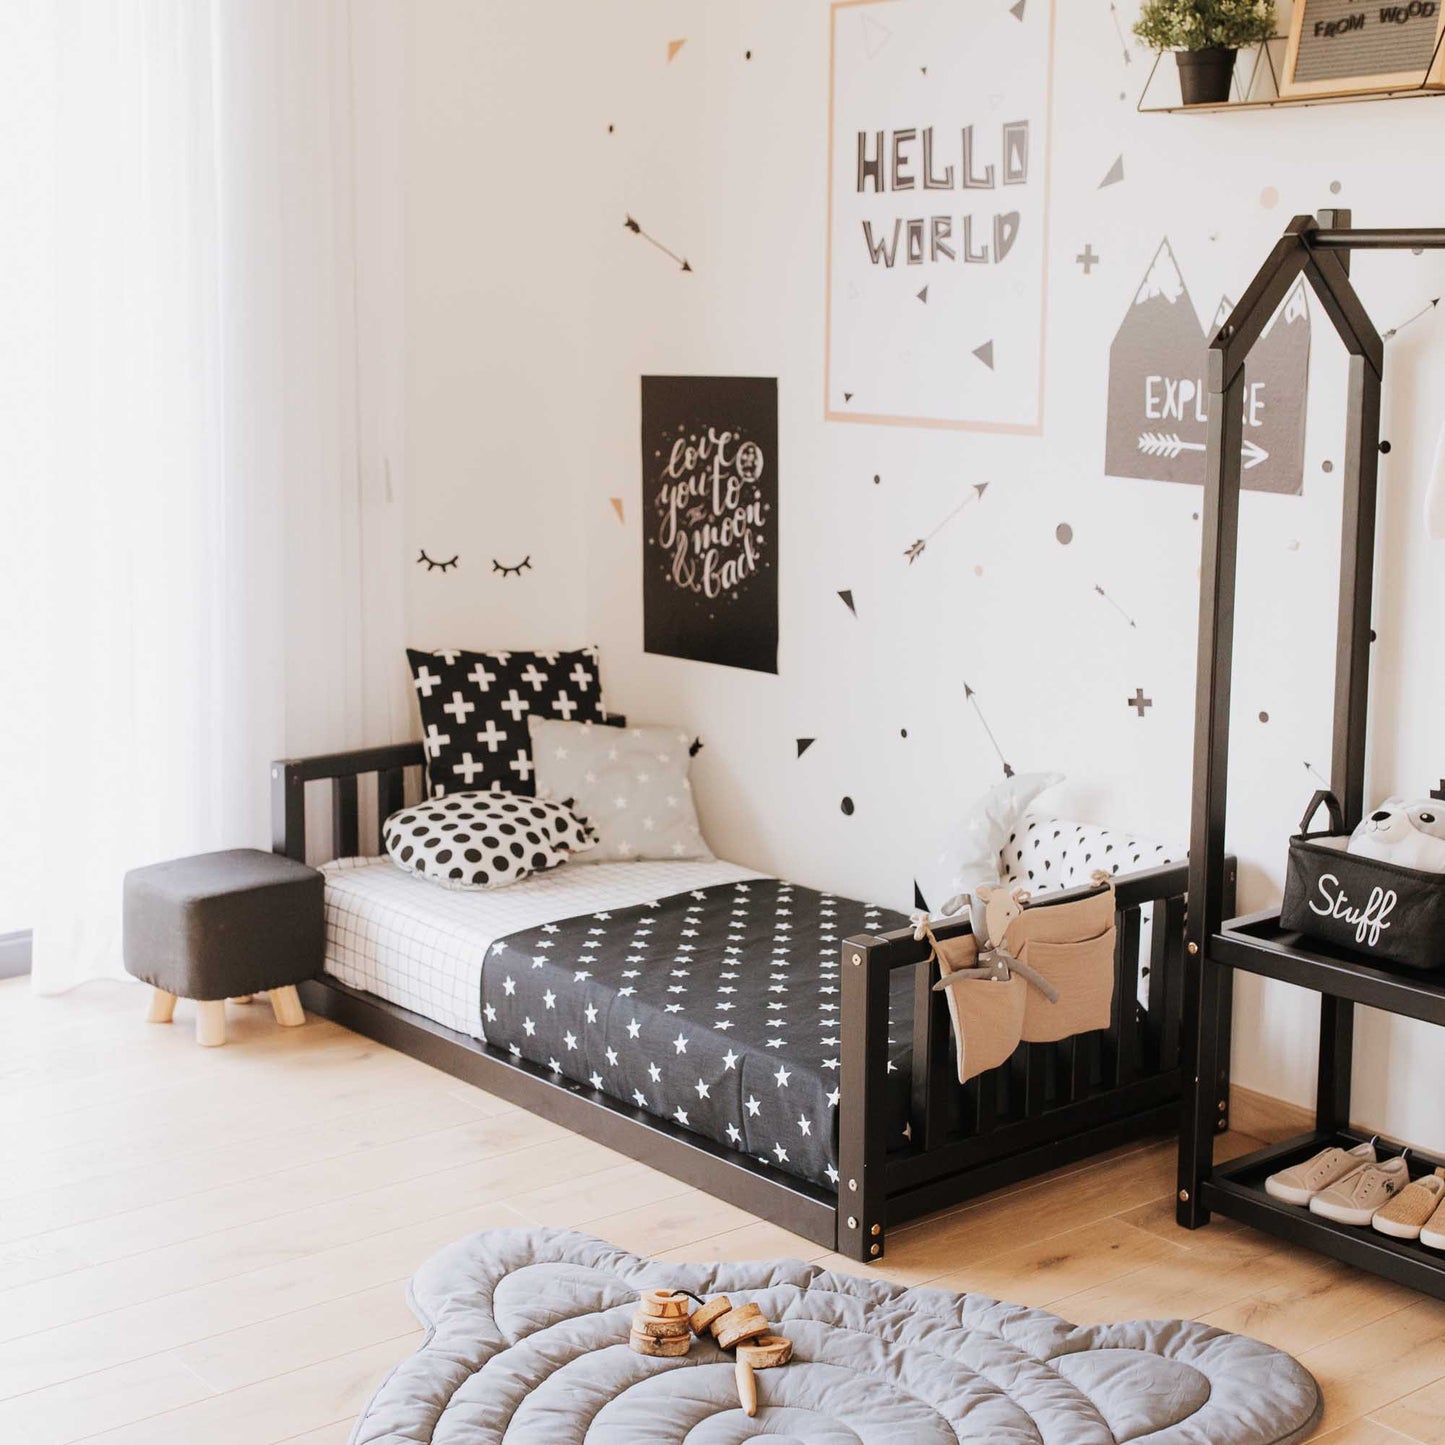 A child's room with a 2-in-1 kid's bed on legs with a vertical rail headboard and footboard made of solid pine or birch wood and black and white decor.